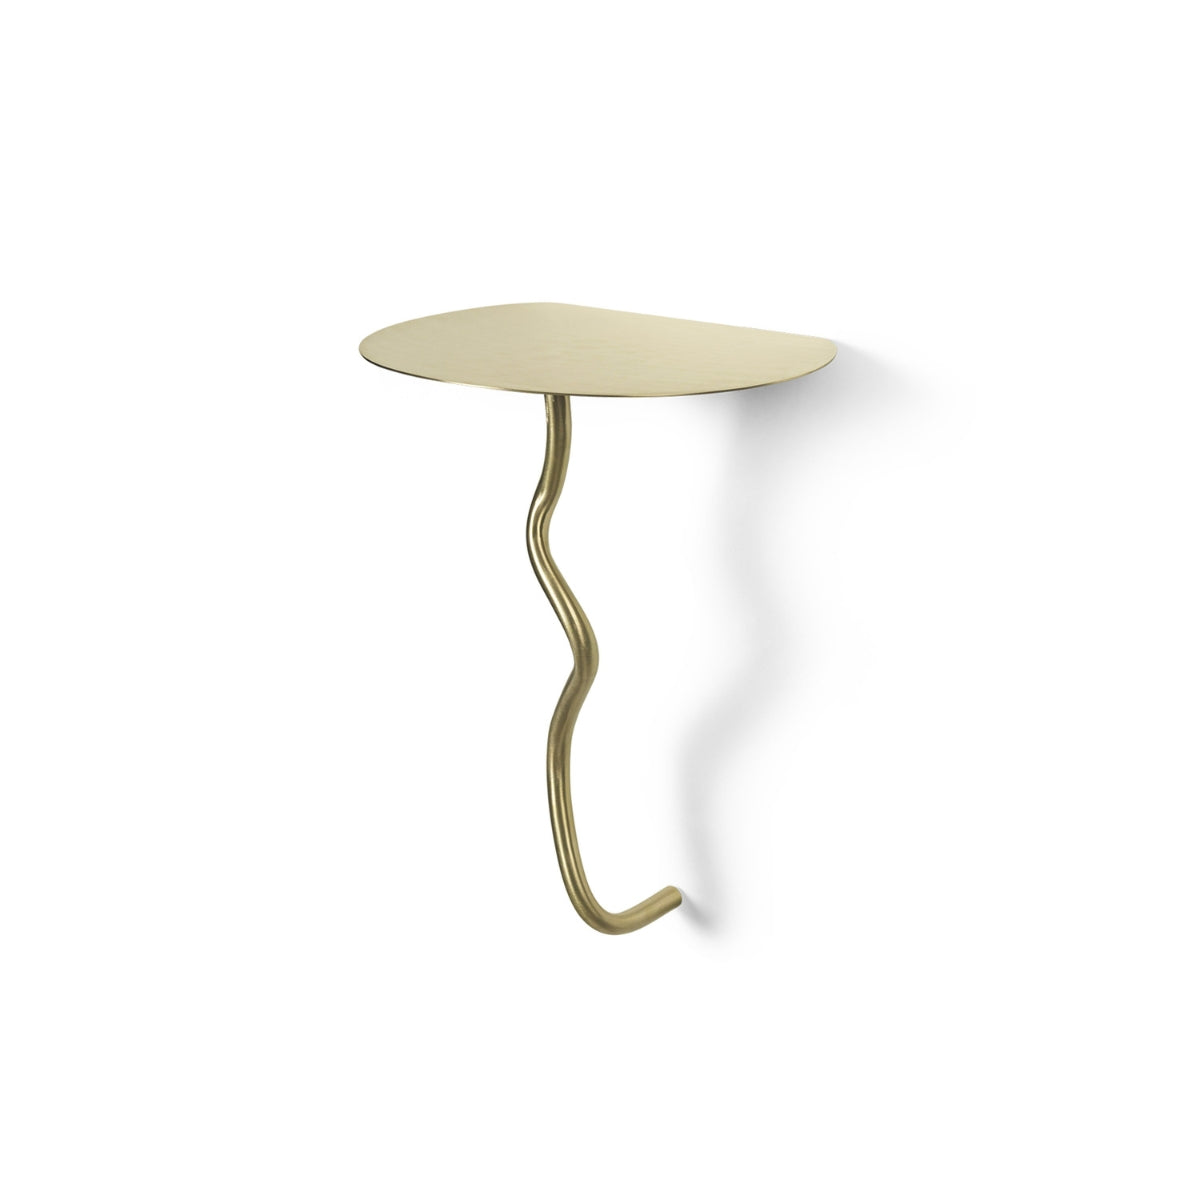 ferm LIVING Curvature Wall Table. Free UK delivery at someday designs. #colour_brass